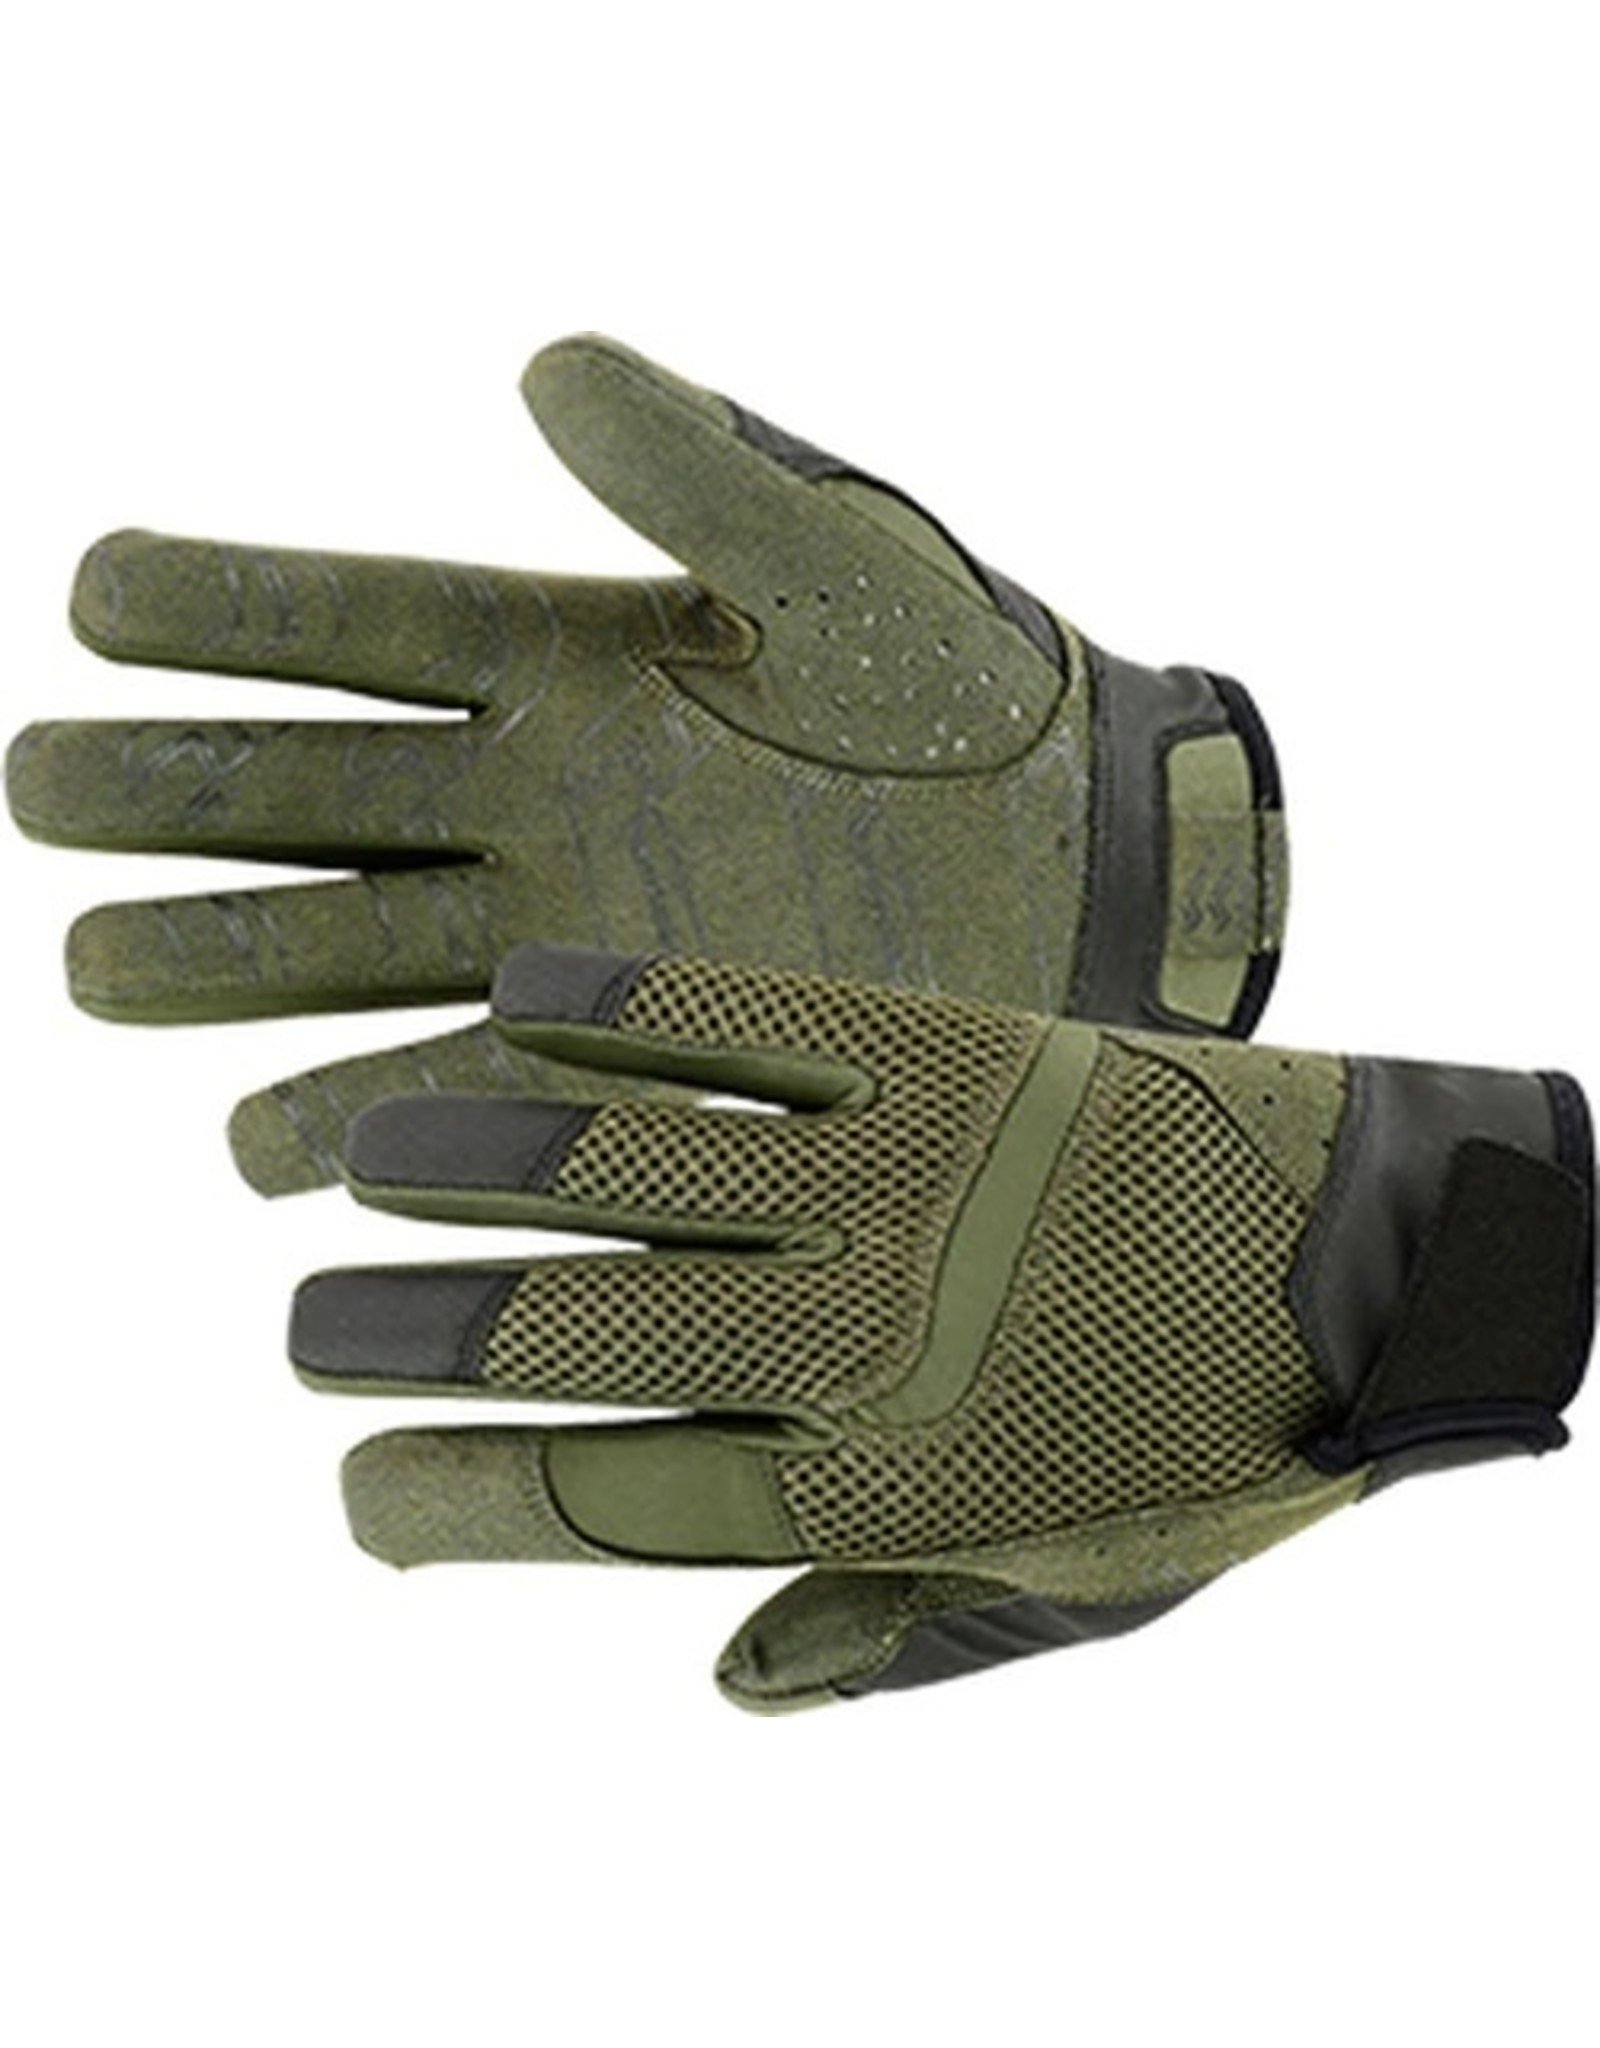 SHADOW STRATEGIC TACTICAL SHOOTING GLOVES